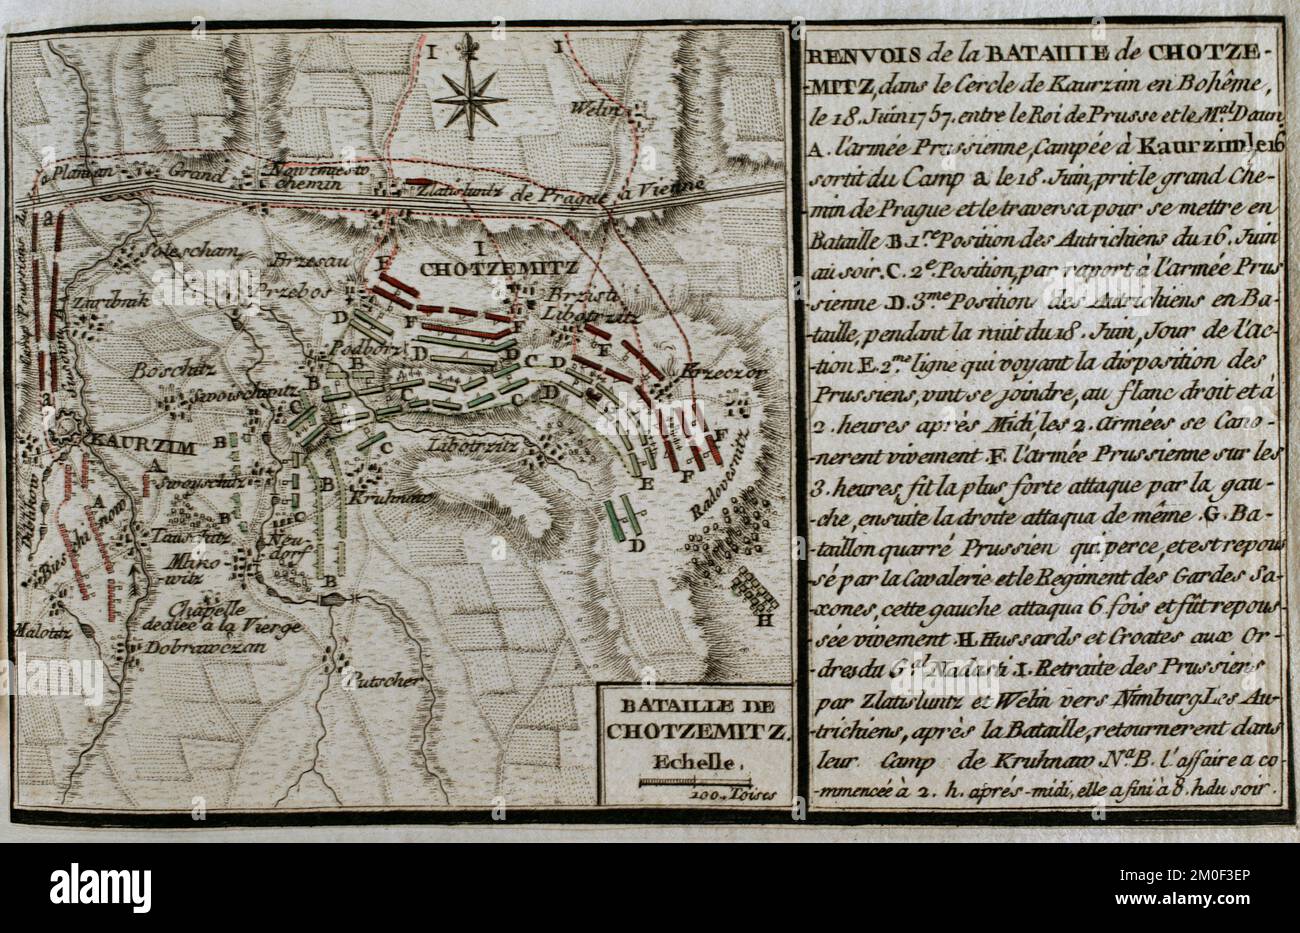 Seven Years War (1756-1763). Map of the Battle of Chotzemitz (18 June 1757). A Prussian army, commanded by Frederick the Great, fought against the Austrian army, led by Marshal Daun, resulting in an Austrian victory. Published in 1765 by the cartographer Jean de Beaurain (1696-1771) as an illustration of his Great Map of Germany, with the events that took place during the Seven Years War. Etching and engraving. French edition, 1765. Military Historical Library of Barcelona (Biblioteca Histórico Militar de Barcelona). Catalonia. Spain. Stock Photo